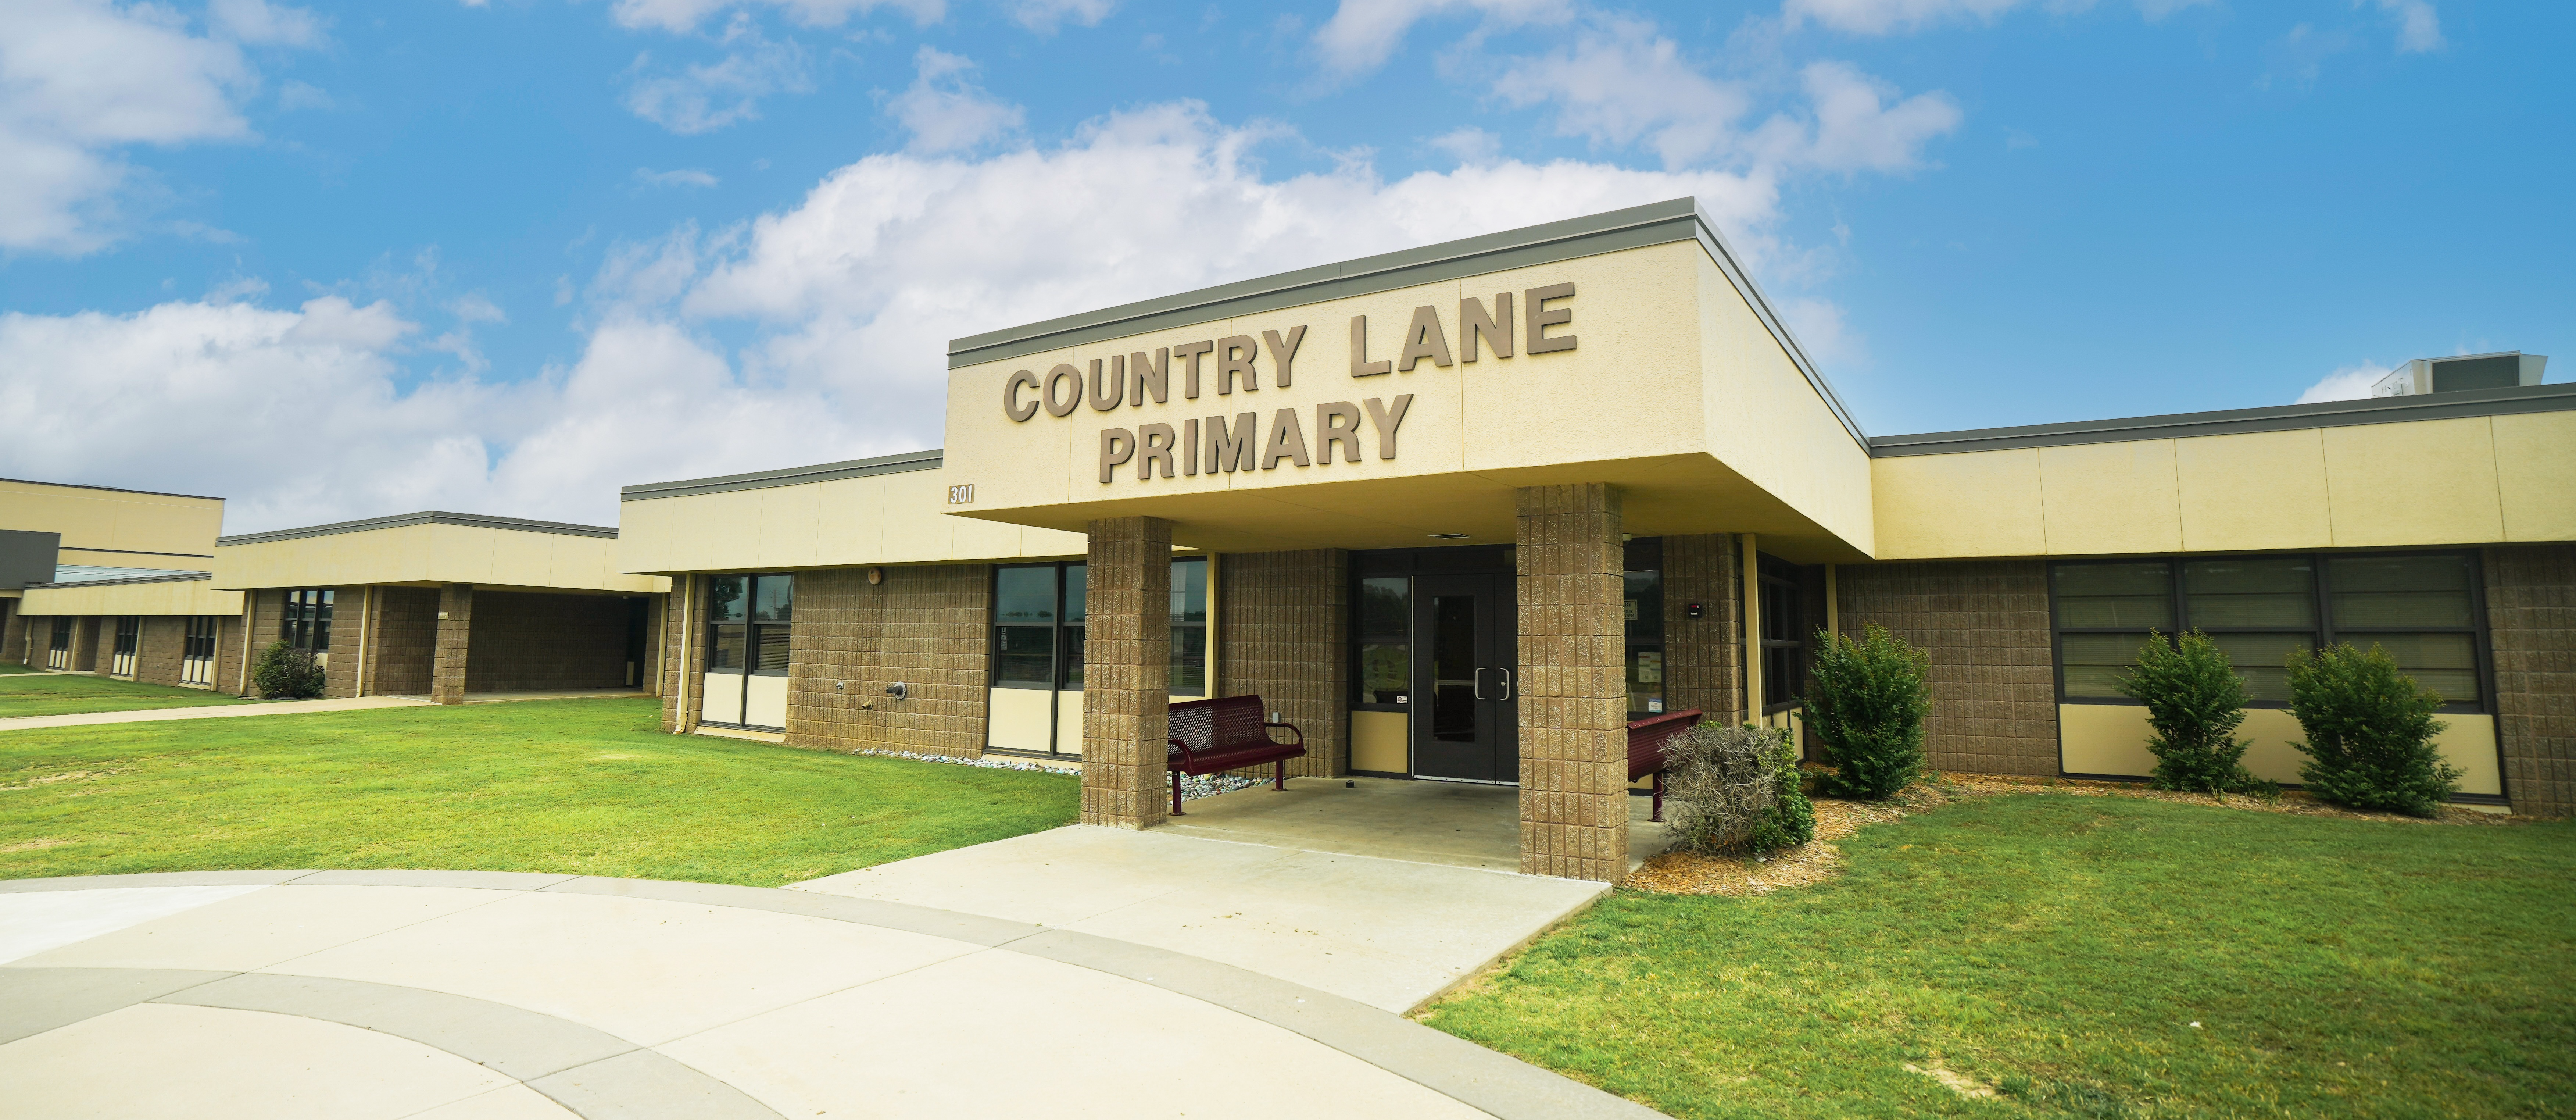 Country Lane Primary